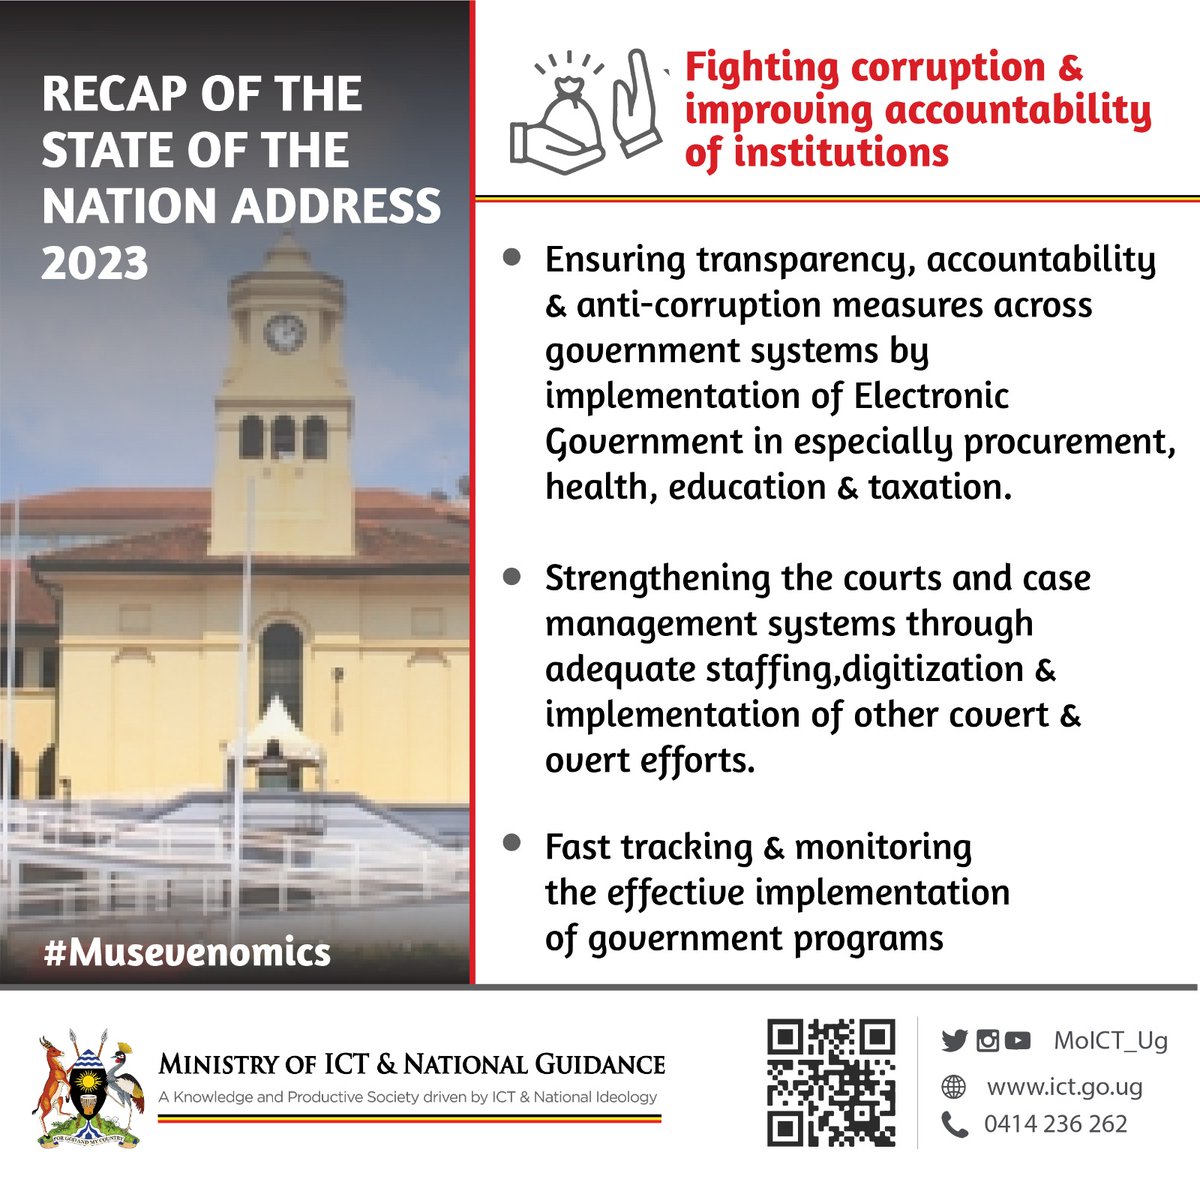 Corruption is a great evil to society that affects the economy of a country and undermines public trust in government.

Let's all work towards
 #ExposeTheCorrupt.